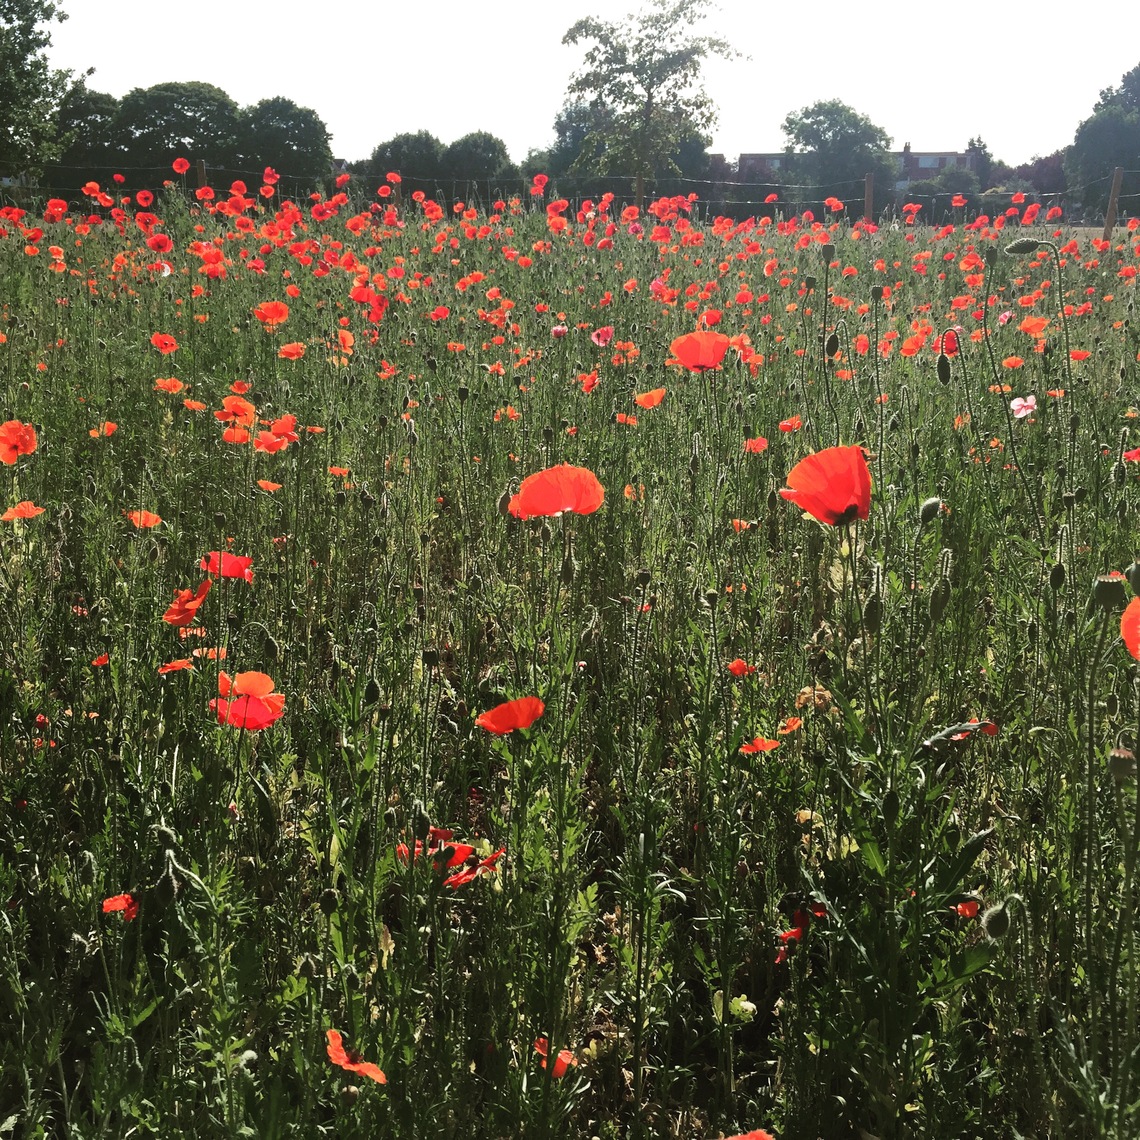 Field of Poppies at North Sheen Rec, planted by Richmond Borough Council in 2015 as part of WW1 commemorations